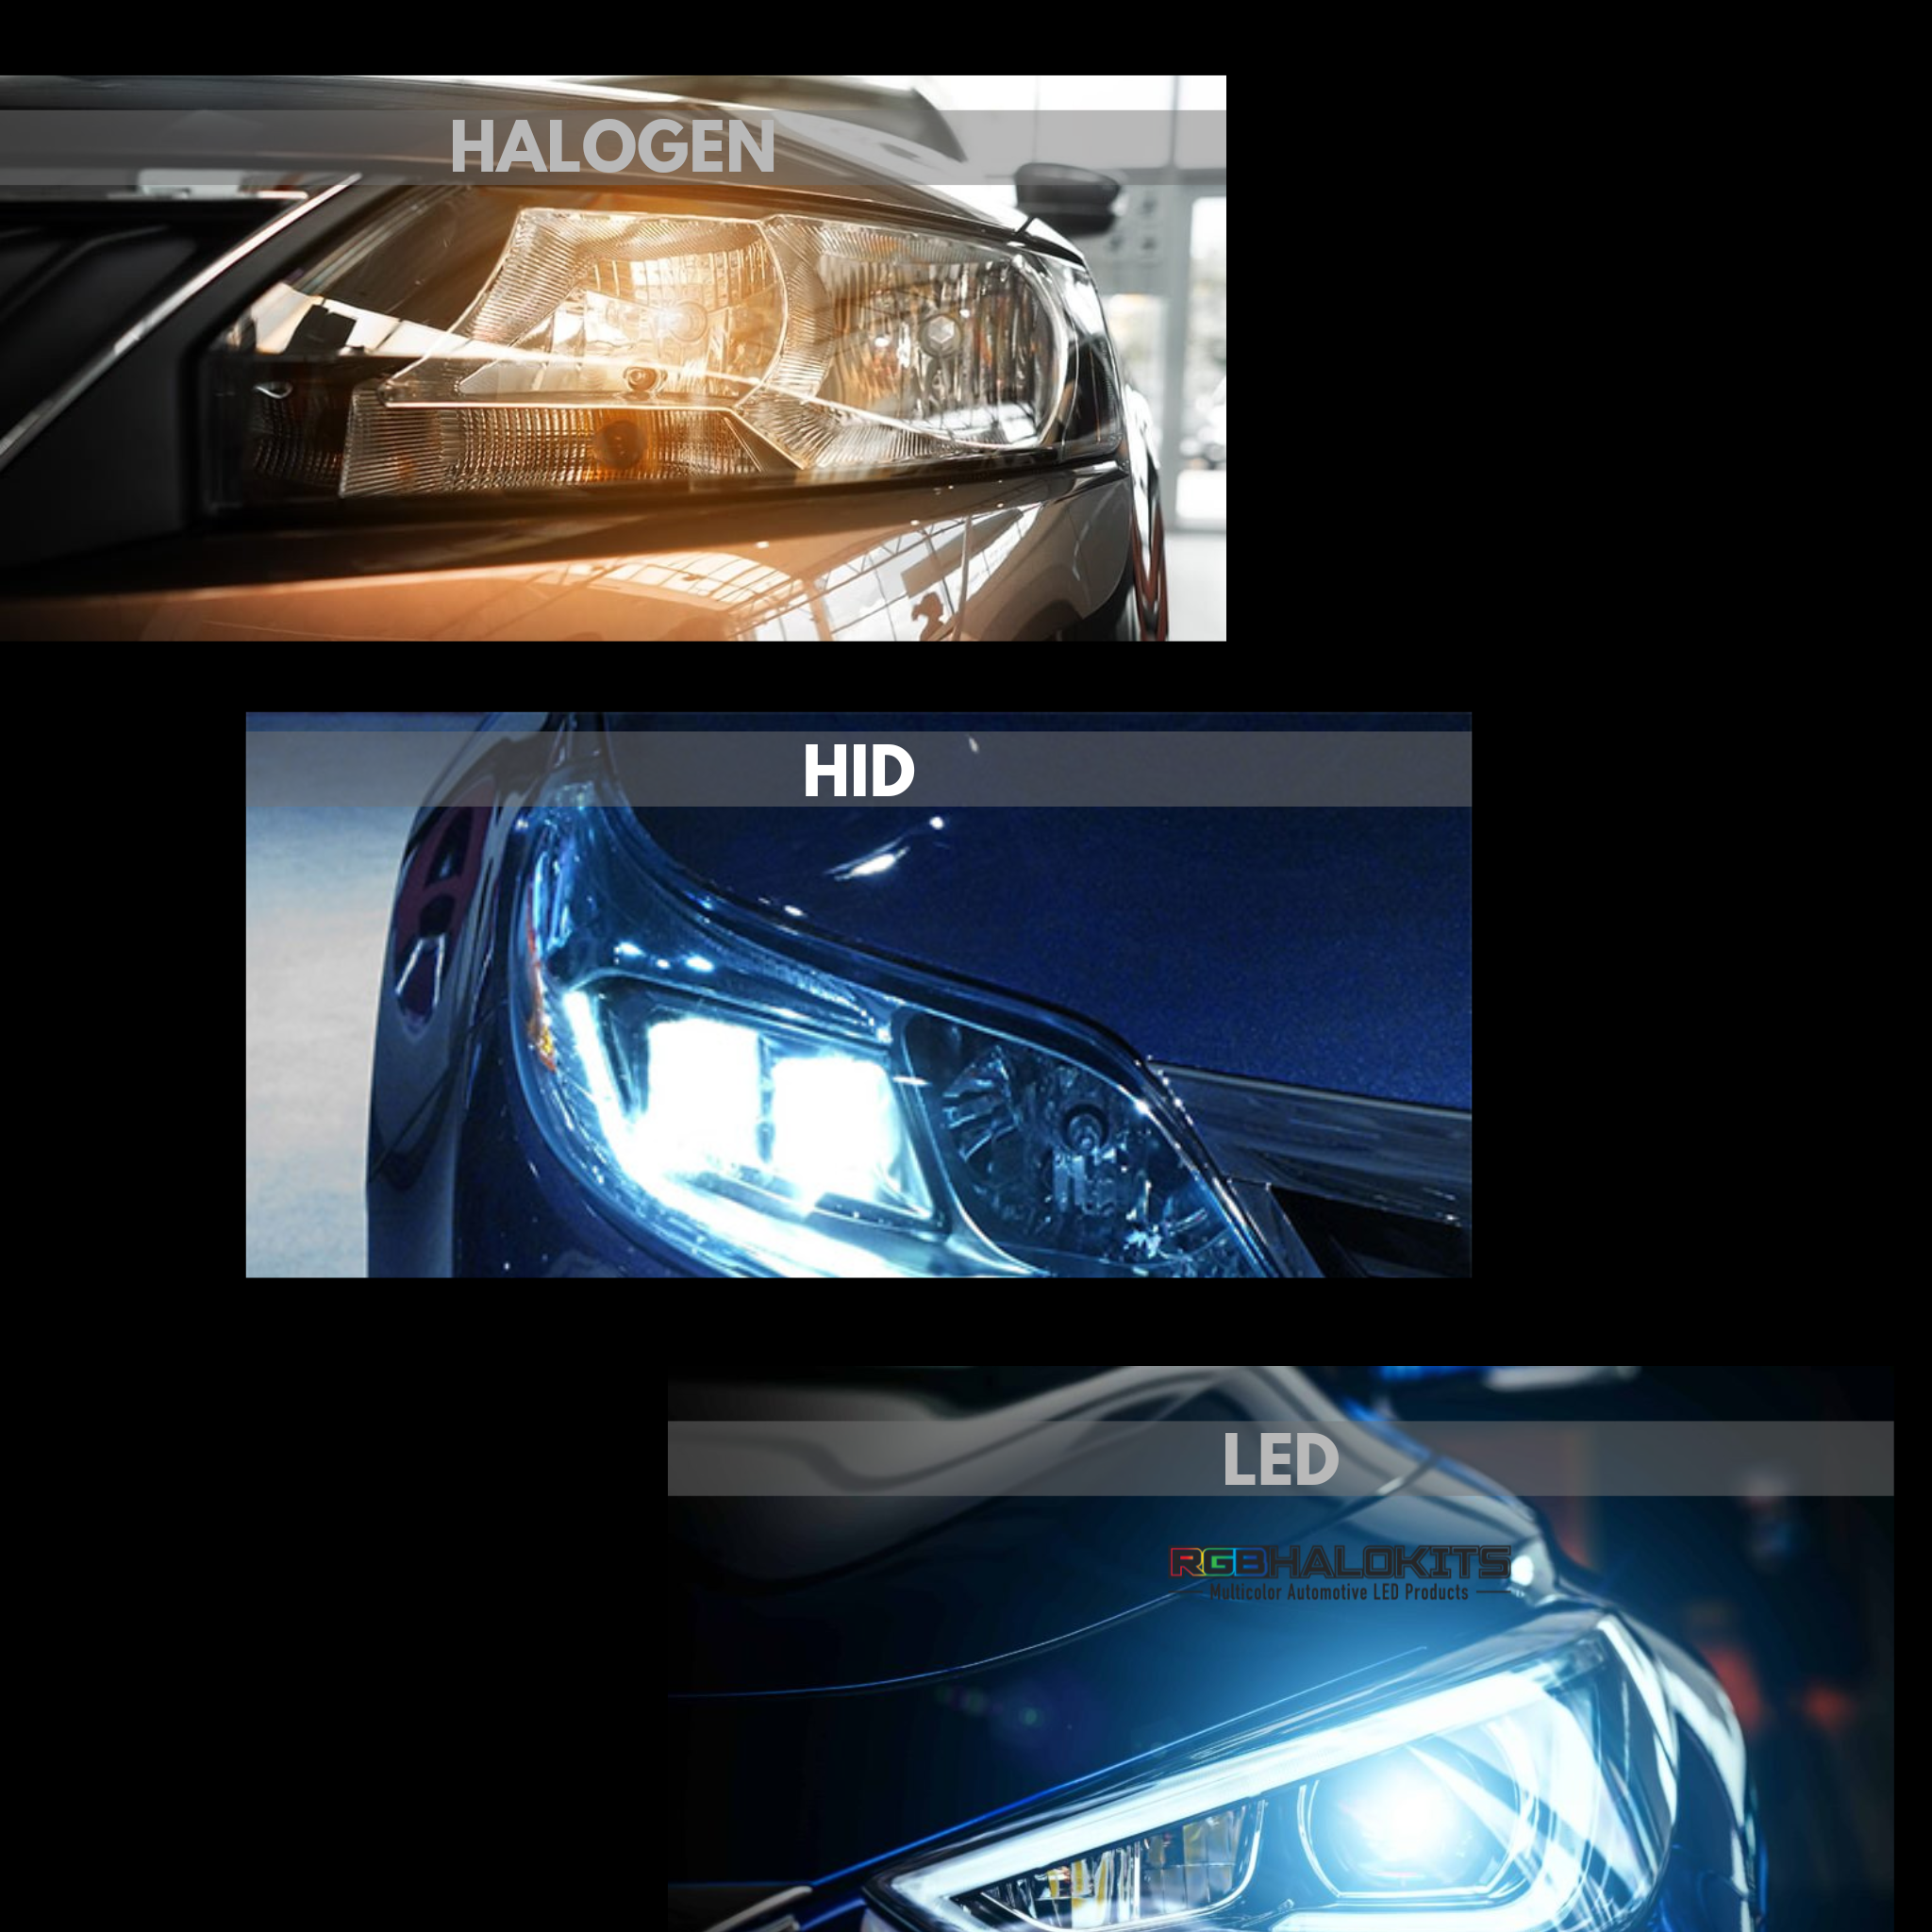 Comparing Halogen, HID, and LED Headlight Bulbs